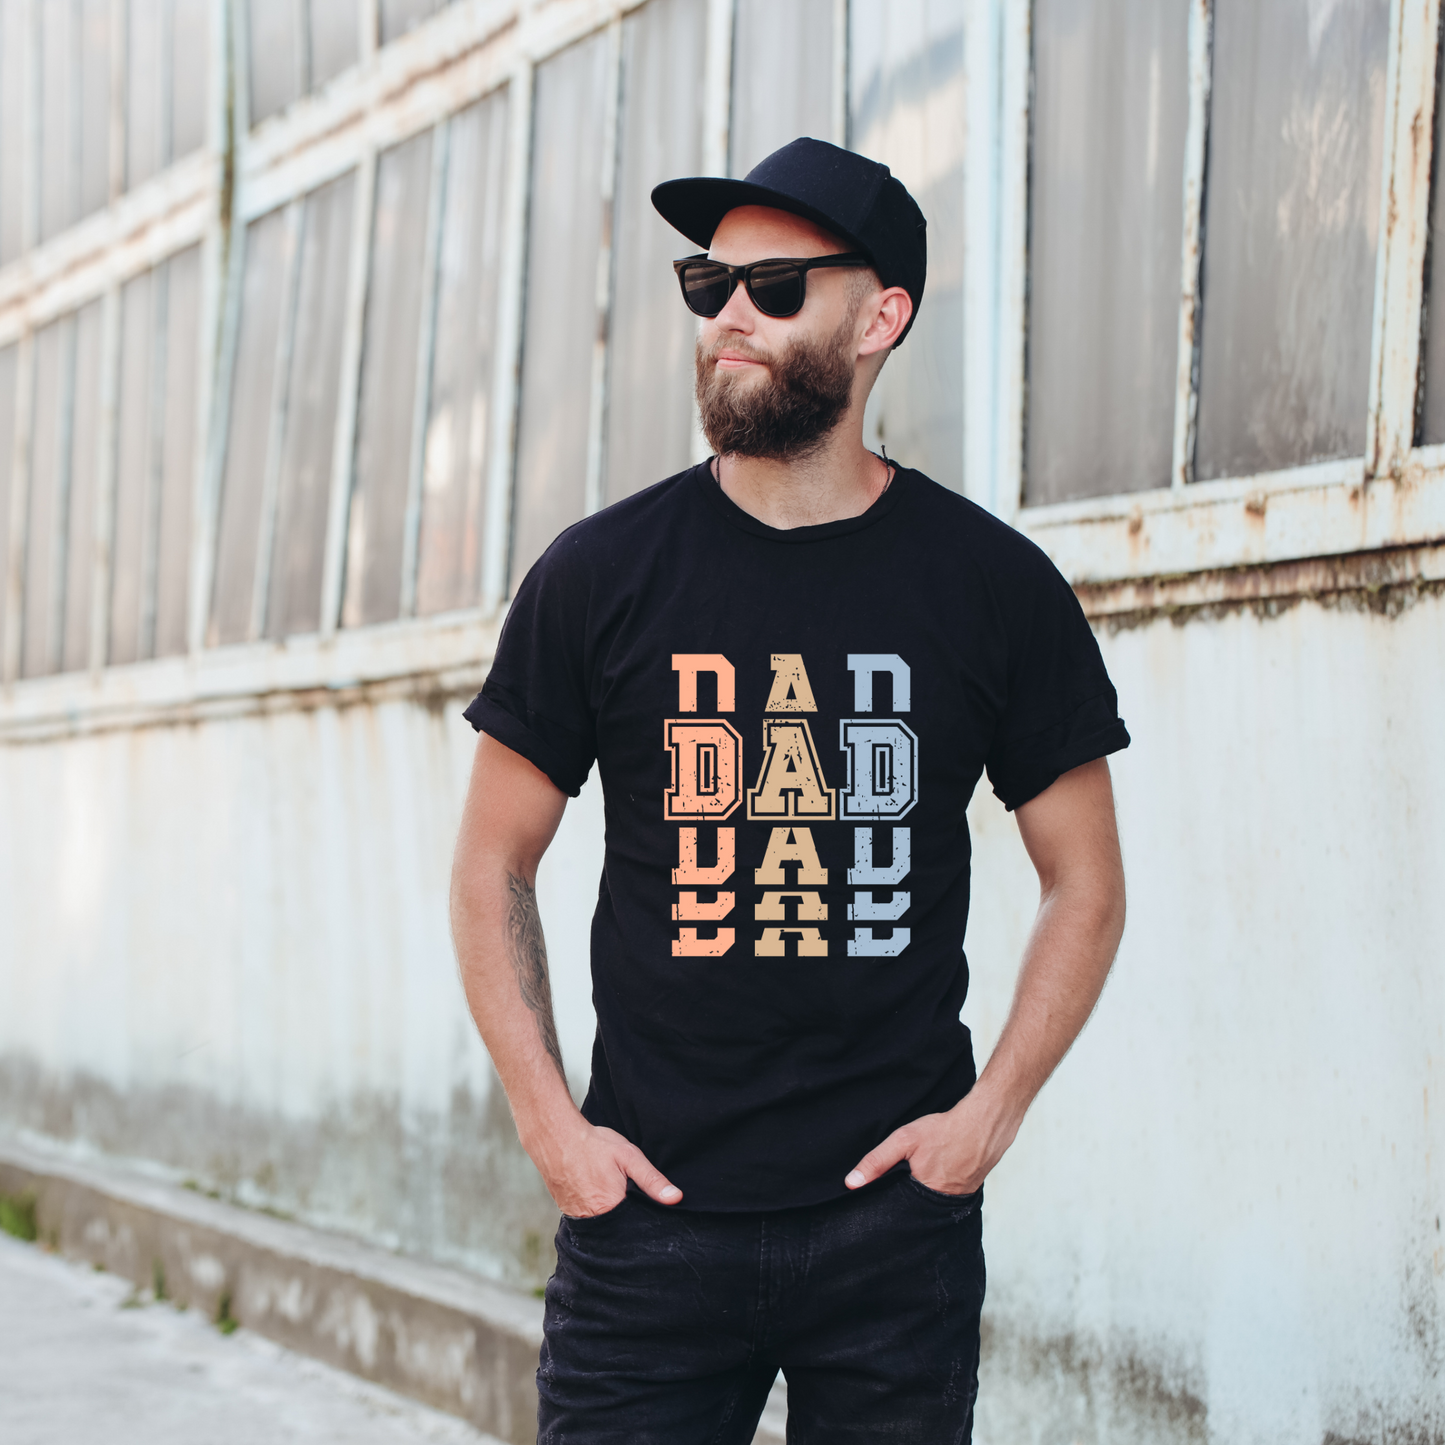 Dad Tee Shirt - Gift for Dad